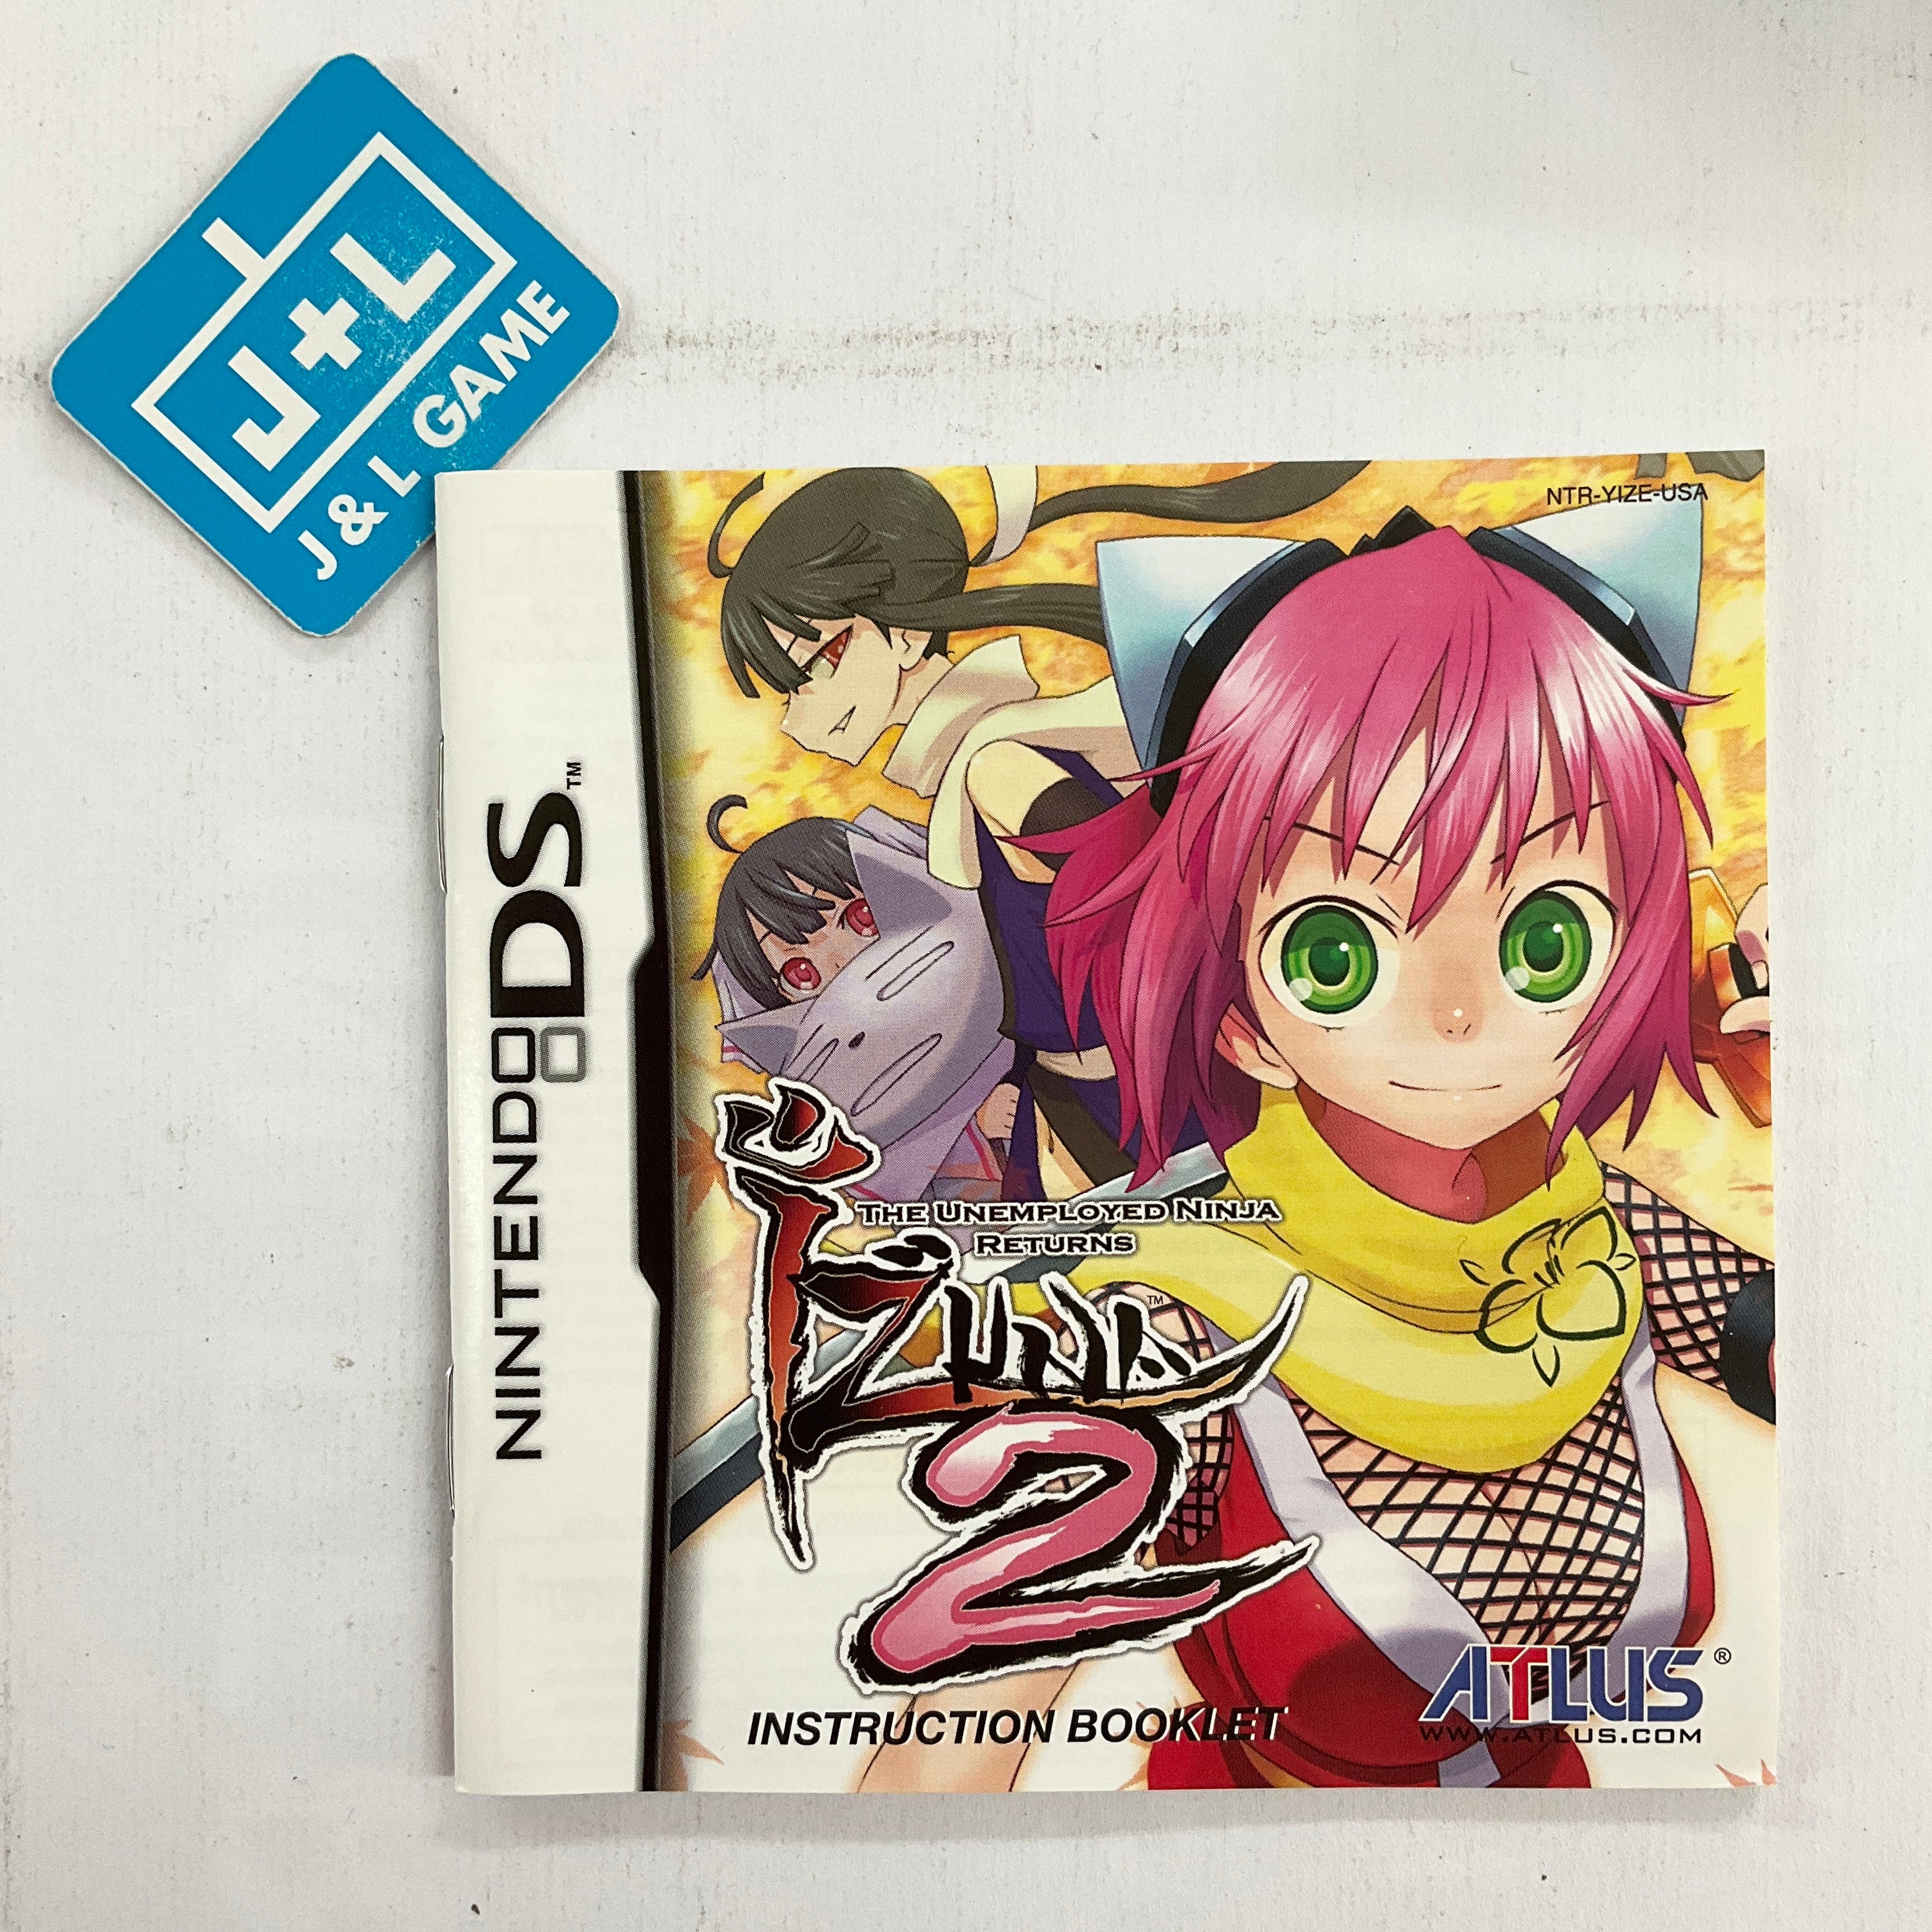 Izuna 2: The Unemployed Ninja Returns - (NDS) Nintendo DS [Pre-Owned] Video Games Atlus   